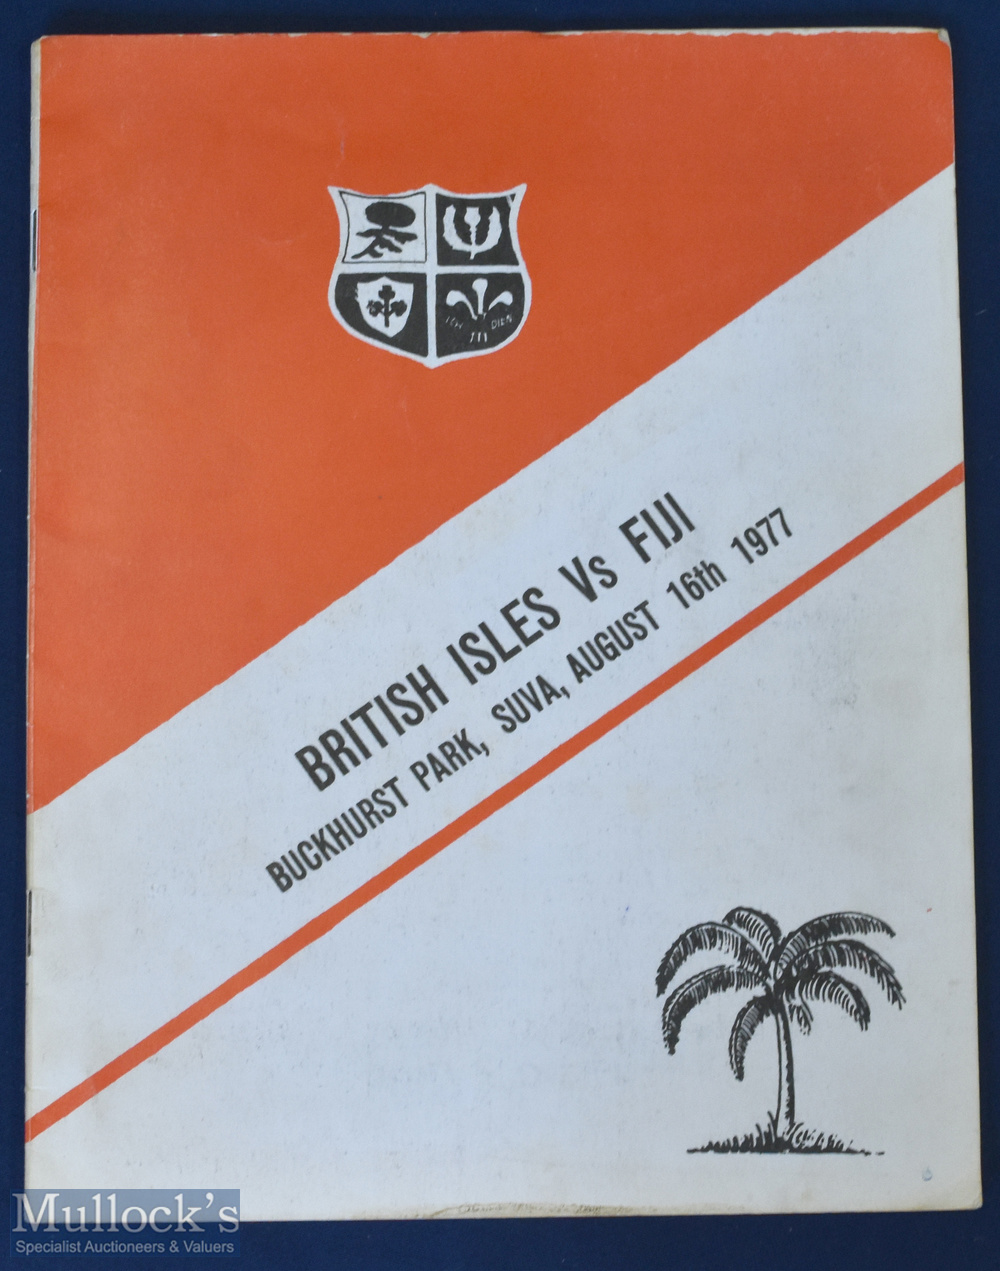 Rare 1977 Fiji v British & Irish Lions Rugby programme: Hard-to-obtain issue from Suva to conclude